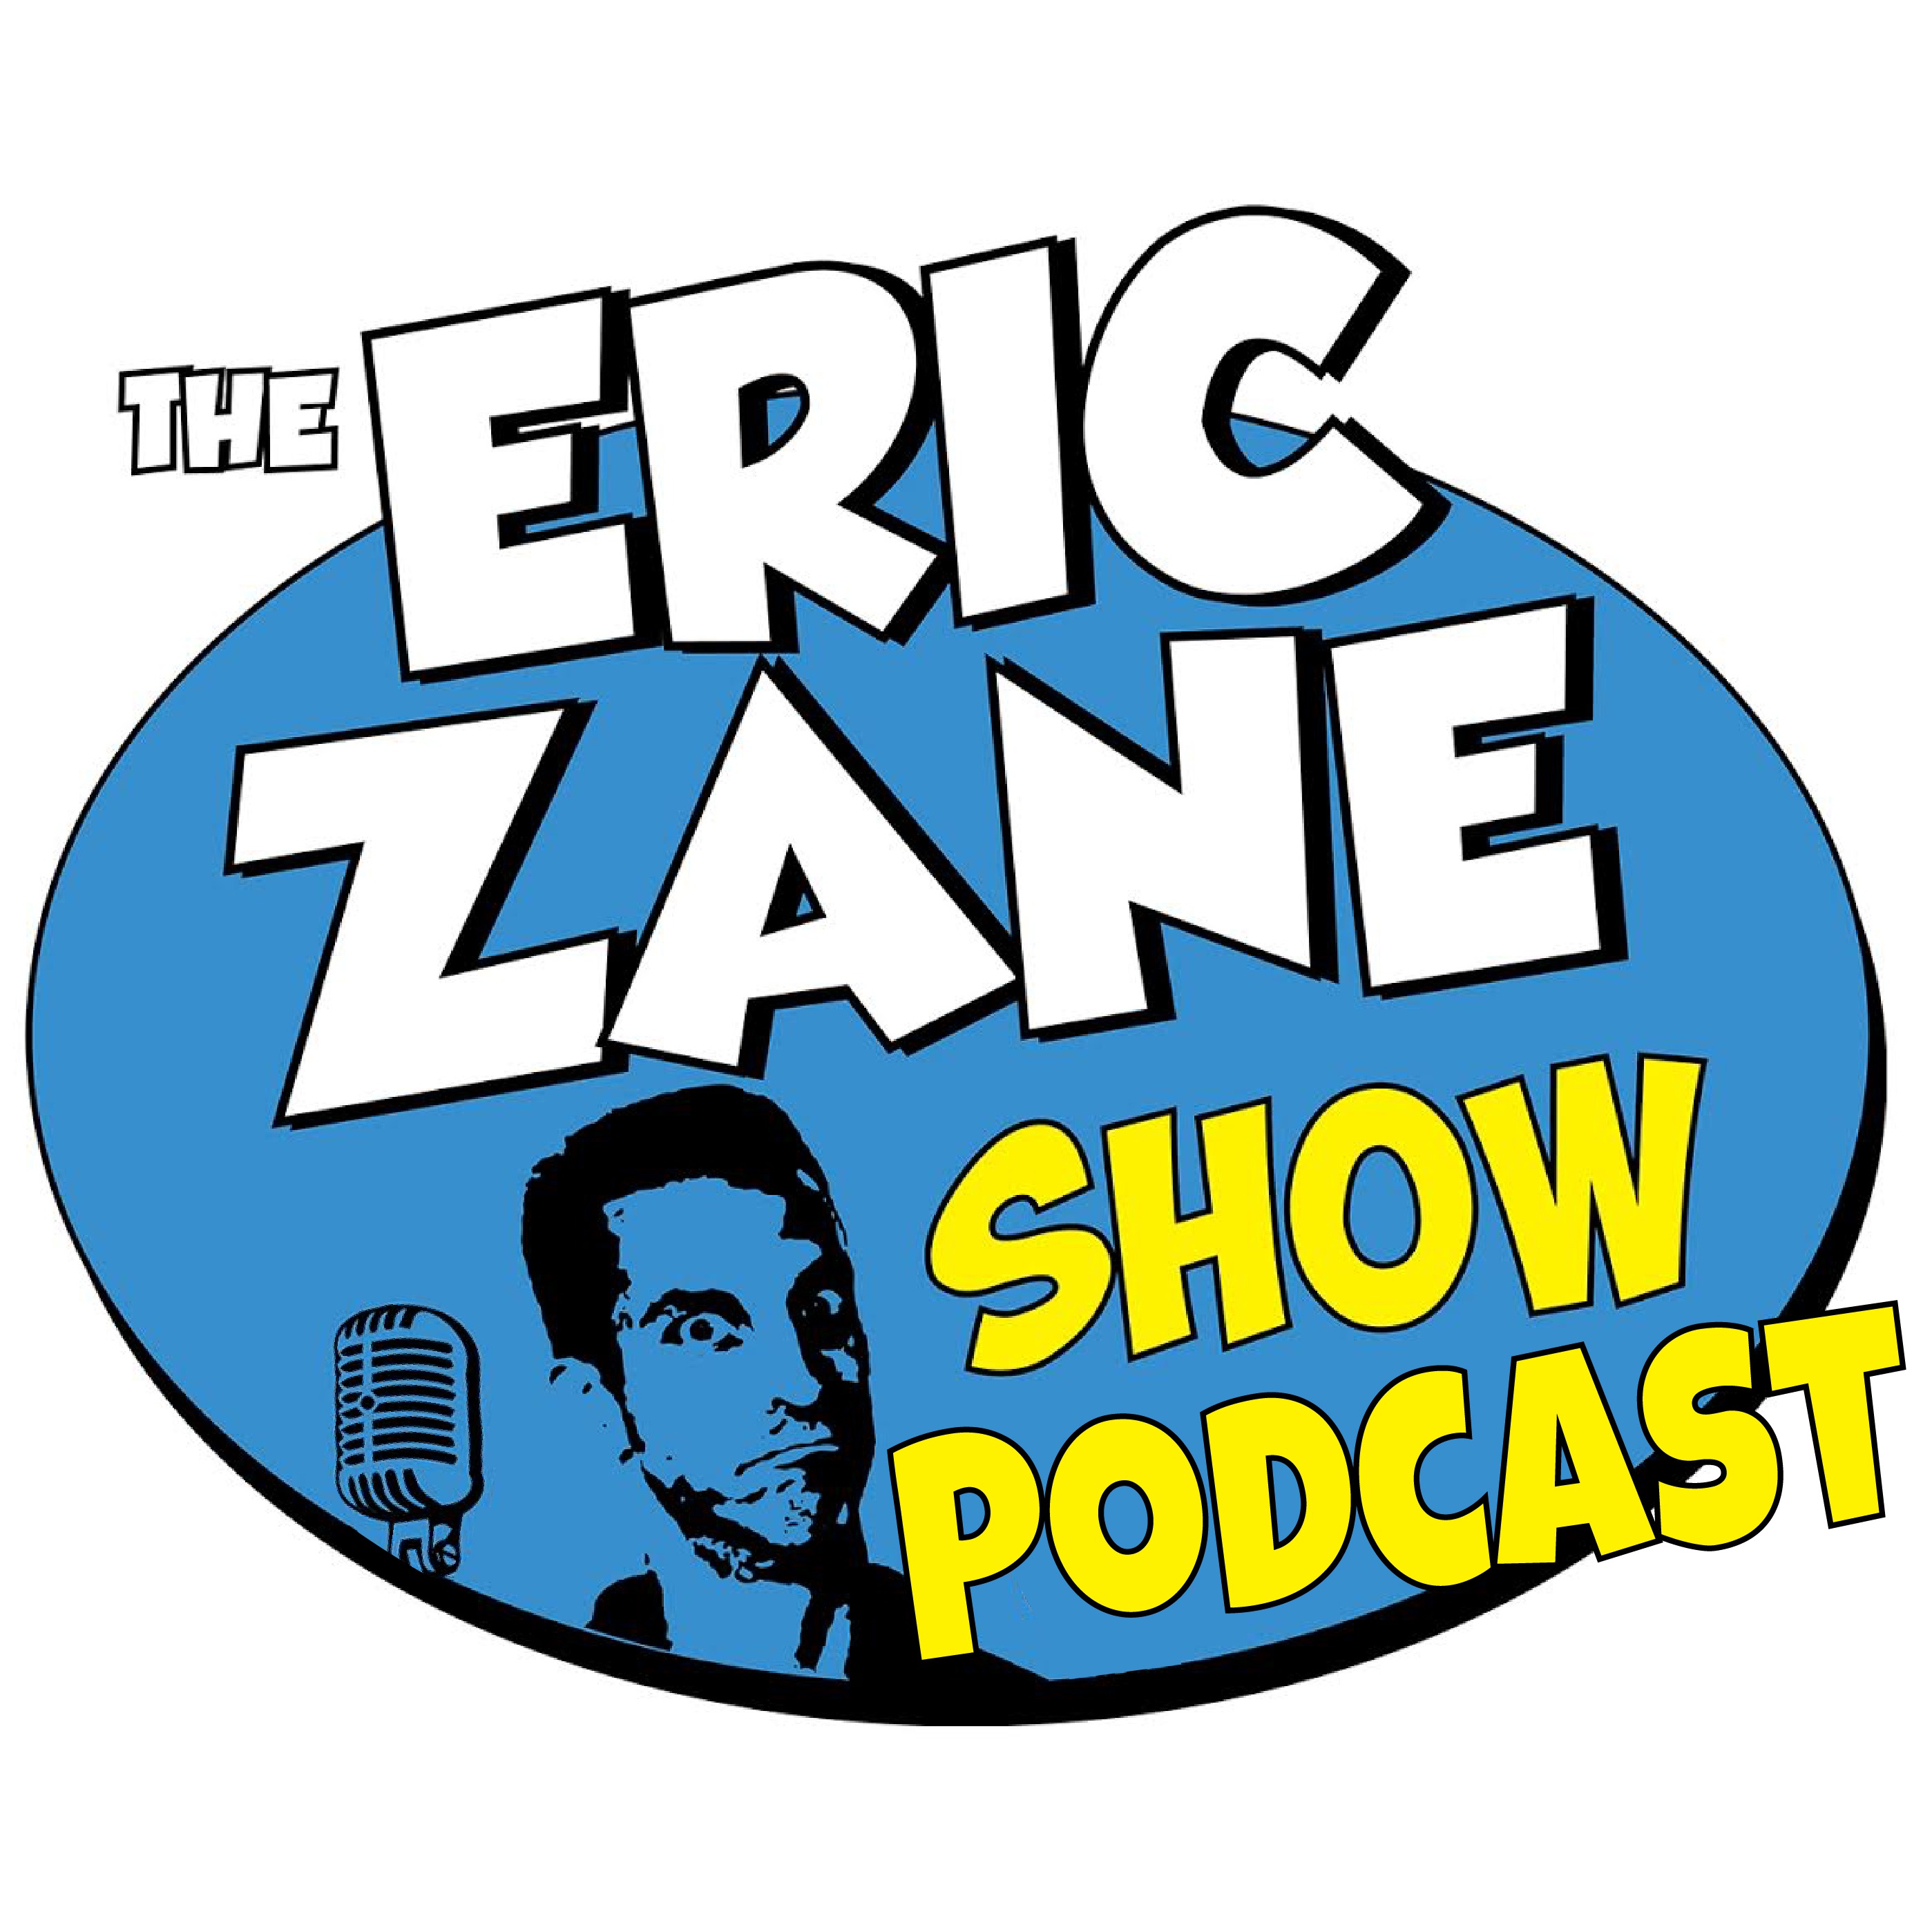 Not The Best of The Eric Zane Show Podcast 12/28/23